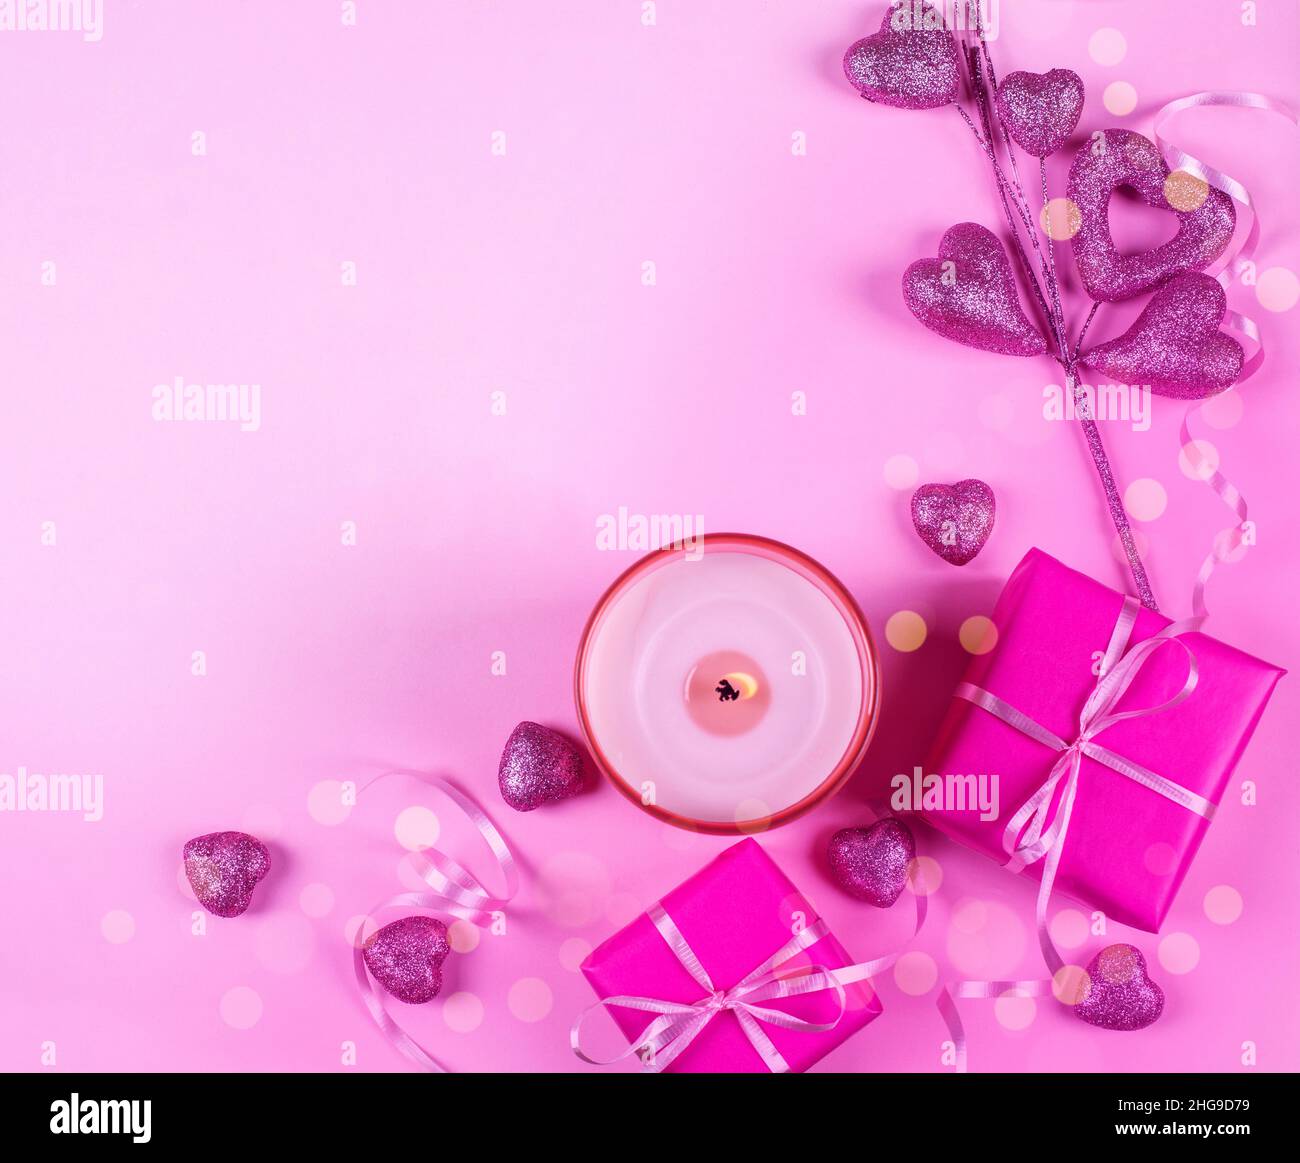 Overhead view of wrapped gift boxes with a candle and heart shaped ornaments on a pink background Stock Photo